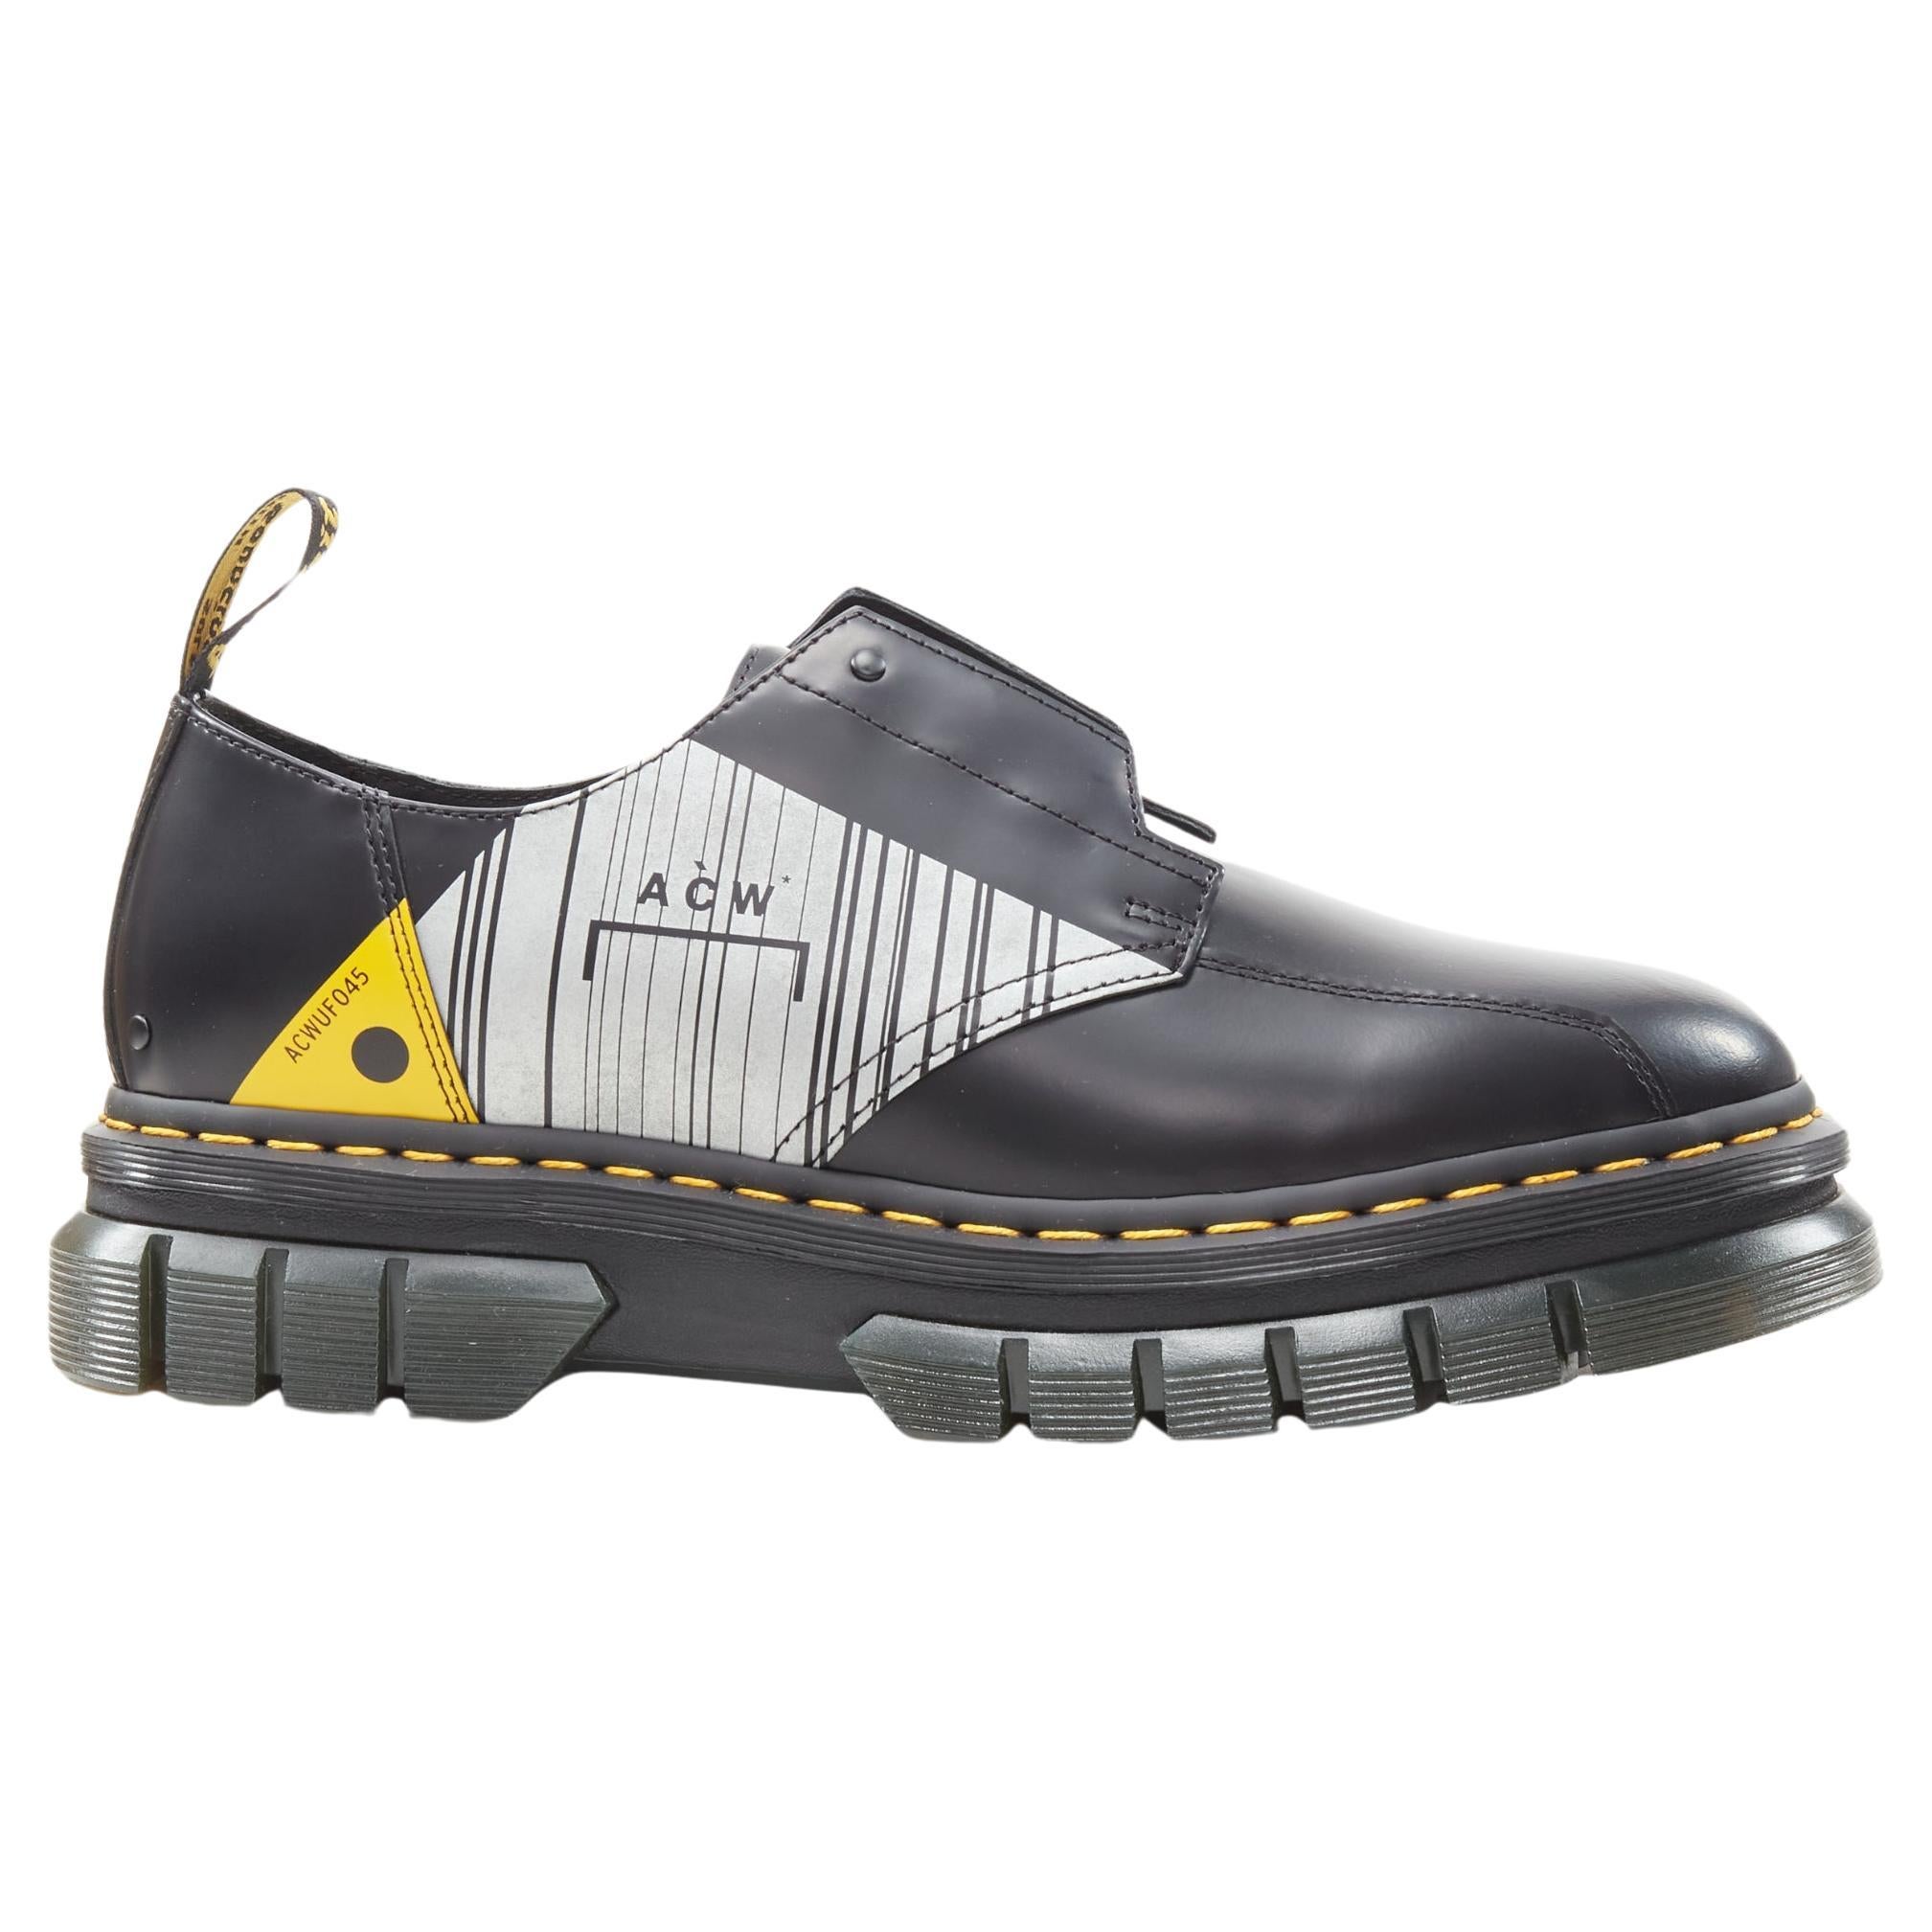 Dr martens louis gusset slip on + FREE SHIPPING